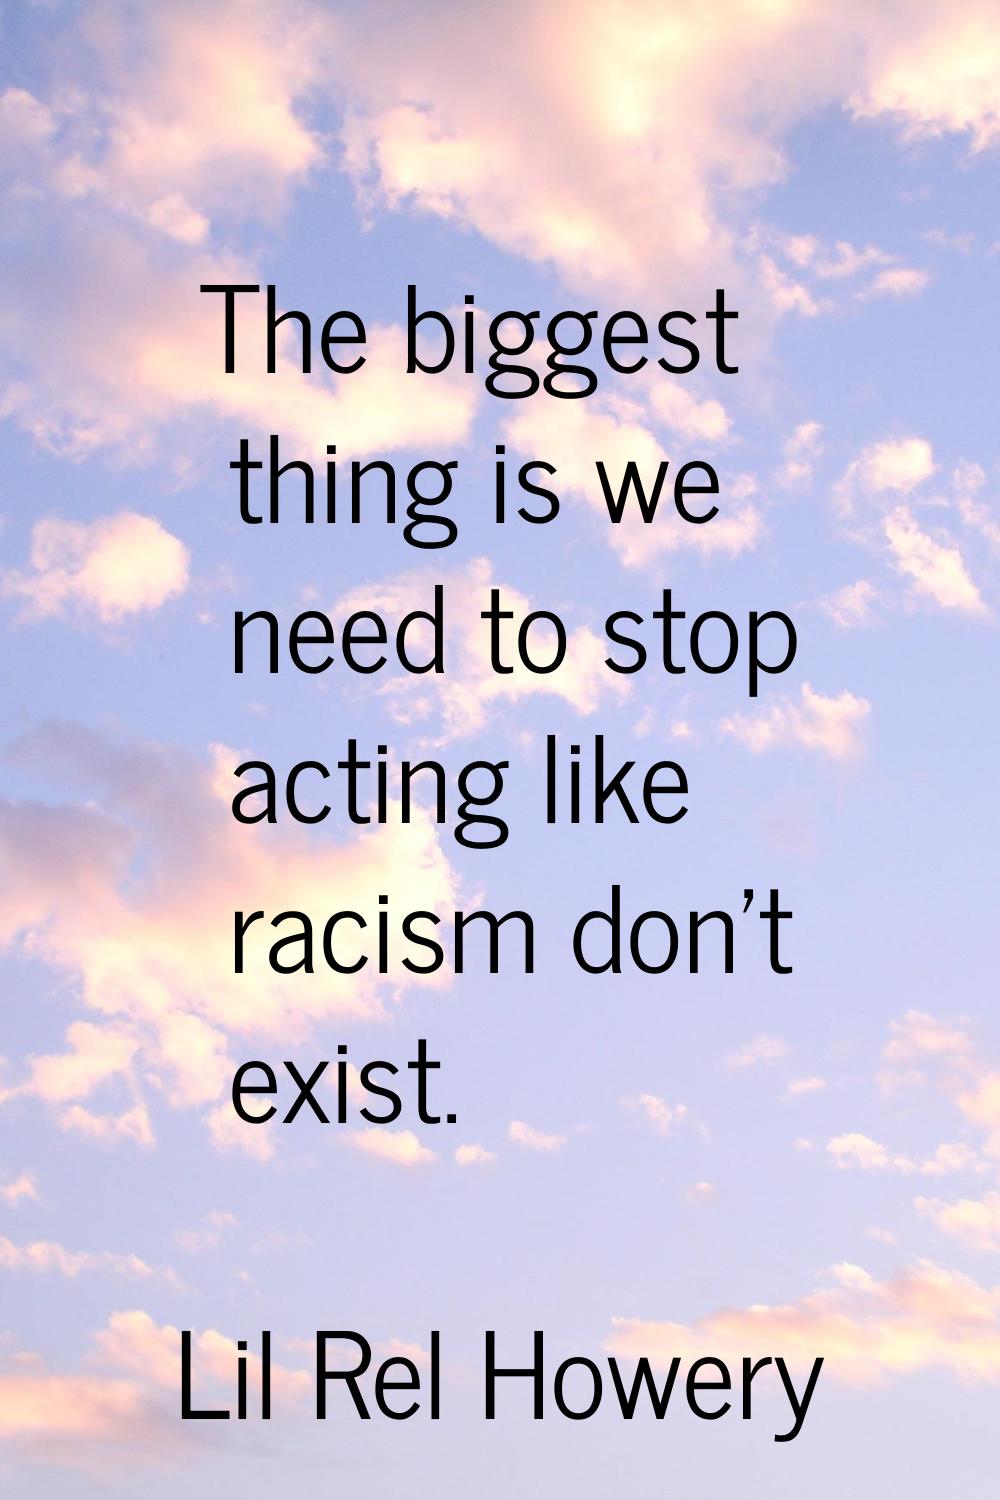 The biggest thing is we need to stop acting like racism don't exist.